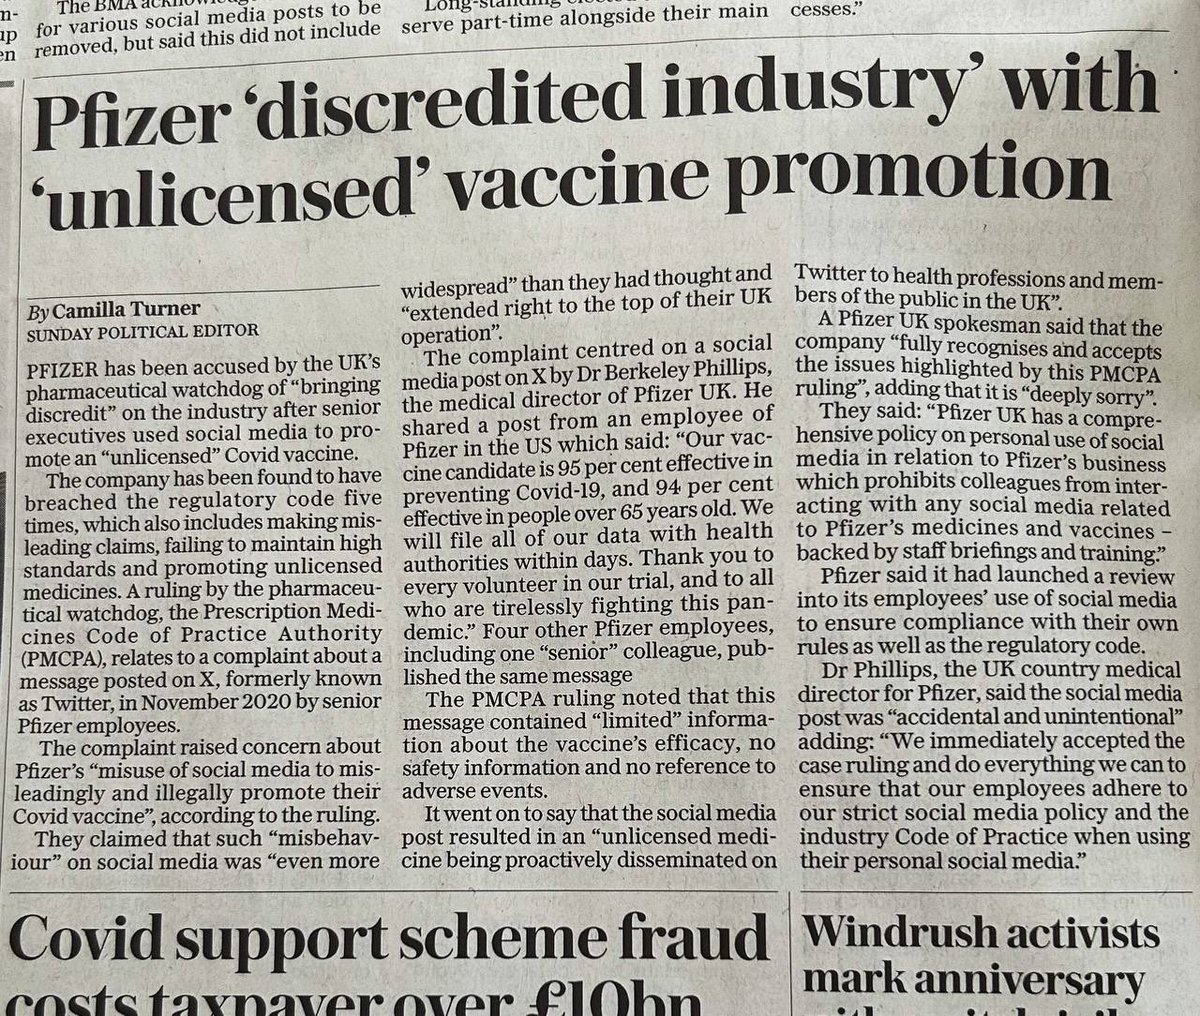 In 2020, Pfizer misleadingly and illegally promoted an unlicensed vaccine 'Our vaccine candidate is 95% effective in preventing Covid-19, and 94% in people over 65yo” 'Limited' information about the vaccine's efficacy, no safety information and no reference to adverse events